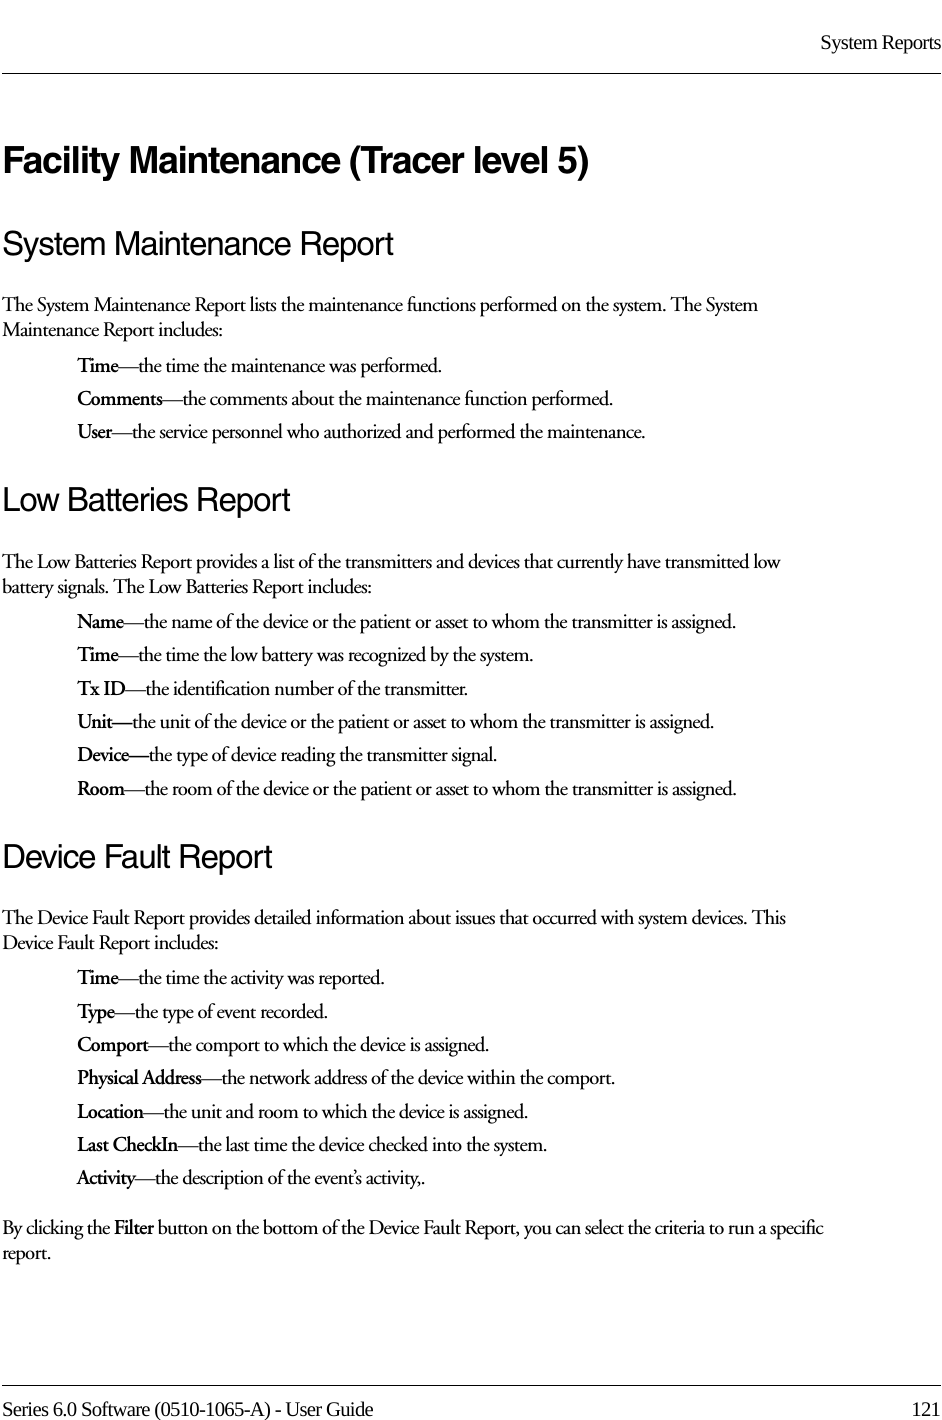 Series 6.0 Software (0510-1065-A) - User Guide  121System ReportsFacility Maintenance (Tracer level 5)System Maintenance ReportThe System Maintenance Report lists the maintenance functions performed on the system. The System Maintenance Report includes:Time—the time the maintenance was performed.Comments—the comments about the maintenance function performed.User—the service personnel who authorized and performed the maintenance.Low Batteries ReportThe Low Batteries Report provides a list of the transmitters and devices that currently have transmitted low battery signals. The Low Batteries Report includes:Name—the name of the device or the patient or asset to whom the transmitter is assigned. Time—the time the low battery was recognized by the system.Tx ID—the identification number of the transmitter.Unit—the unit of the device or the patient or asset to whom the transmitter is assigned.Device—the type of device reading the transmitter signal.Room—the room of the device or the patient or asset to whom the transmitter is assigned.Device Fault ReportThe Device Fault Report provides detailed information about issues that occurred with system devices. This Device Fault Report includes:Time—the time the activity was reported.Type—the type of event recorded.Comport—the comport to which the device is assigned.Physical Address—the network address of the device within the comport.Location—the unit and room to which the device is assigned.Last CheckIn—the last time the device checked into the system.Activity—the description of the event’s activity,.By clicking the Filter button on the bottom of the Device Fault Report, you can select the criteria to run a specific report. 